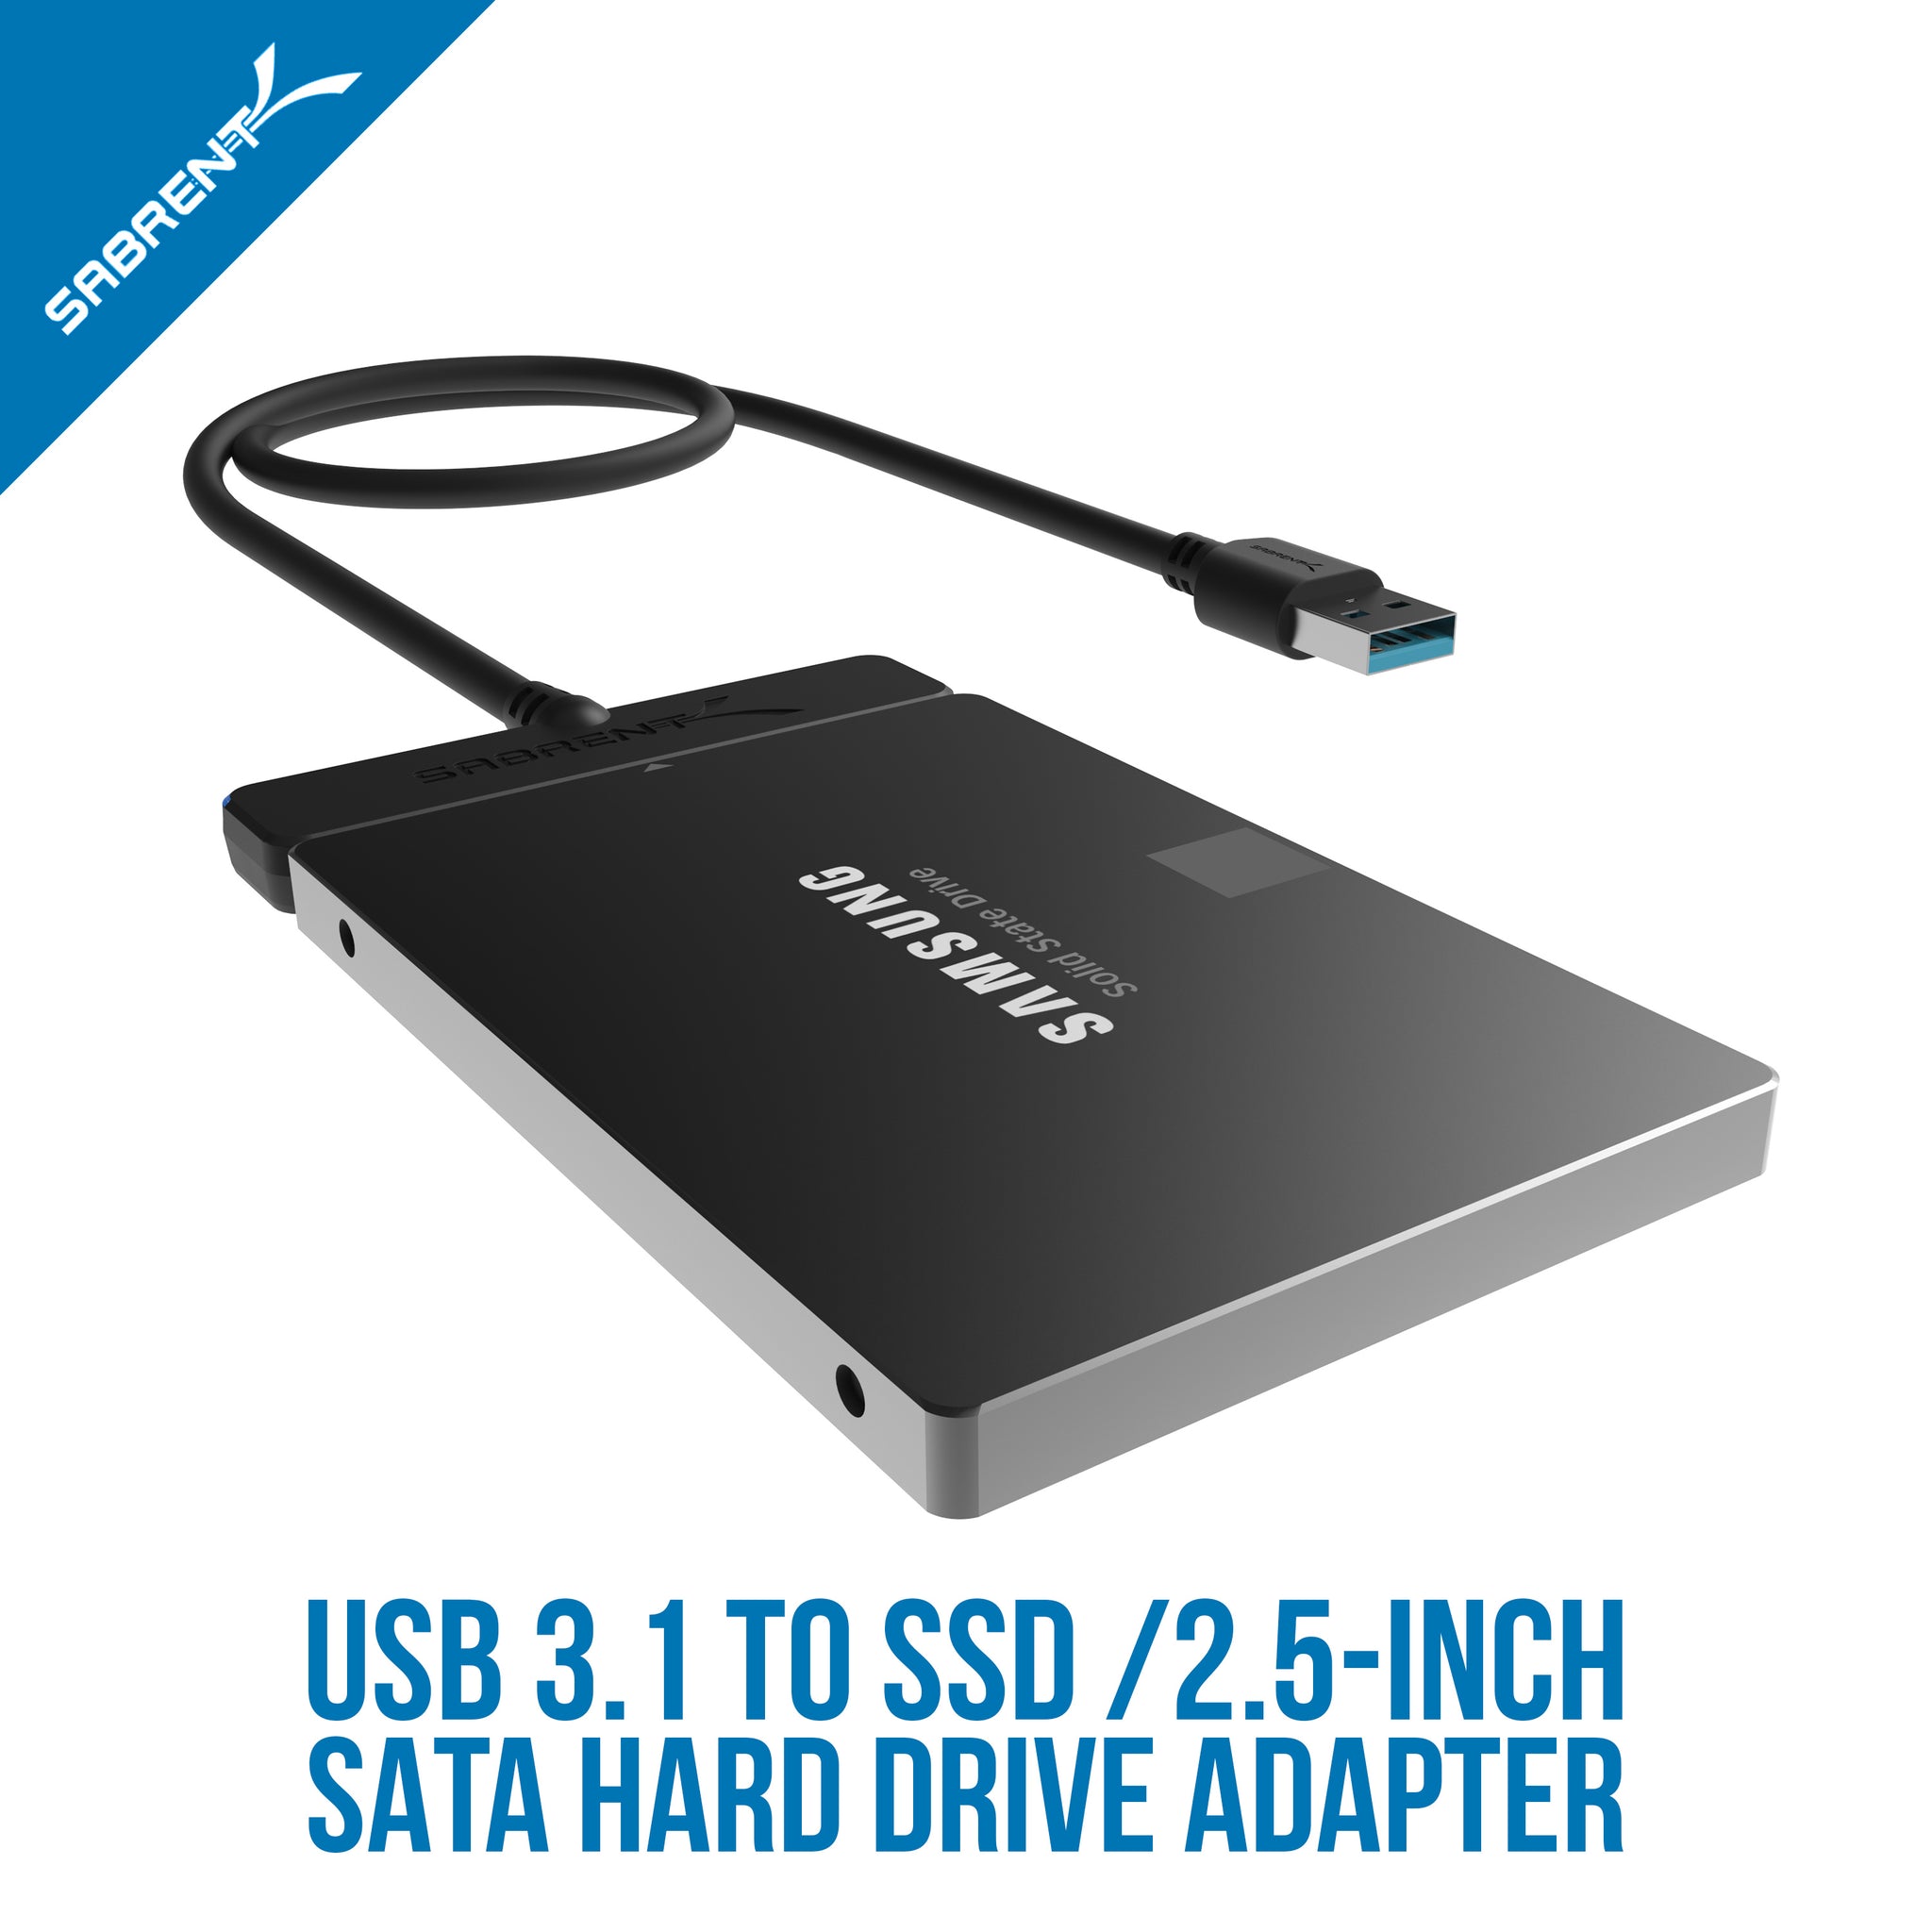 USB 3.1 (Type-A) to SSD / 2.5-Inch SATA Hard Drive - Sabrent